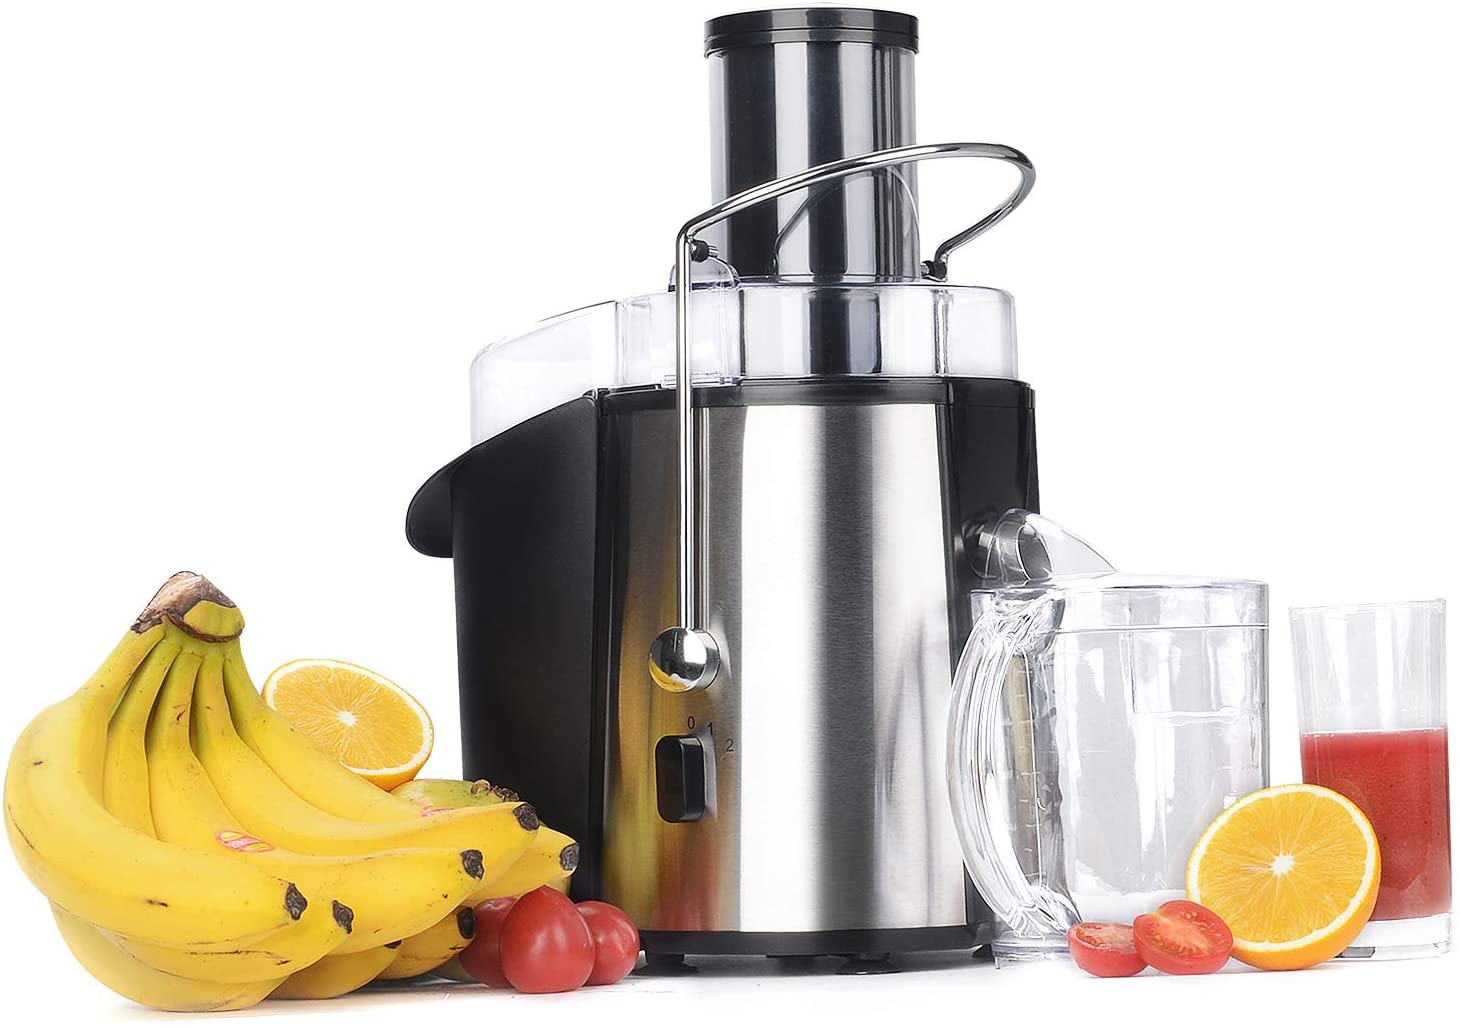 Impex JR 3510 850W 18000 RPM Stainless Steel Juice Extractor Maker with 2 Speed built in Safety Switch 2L Pulp & 1L Container